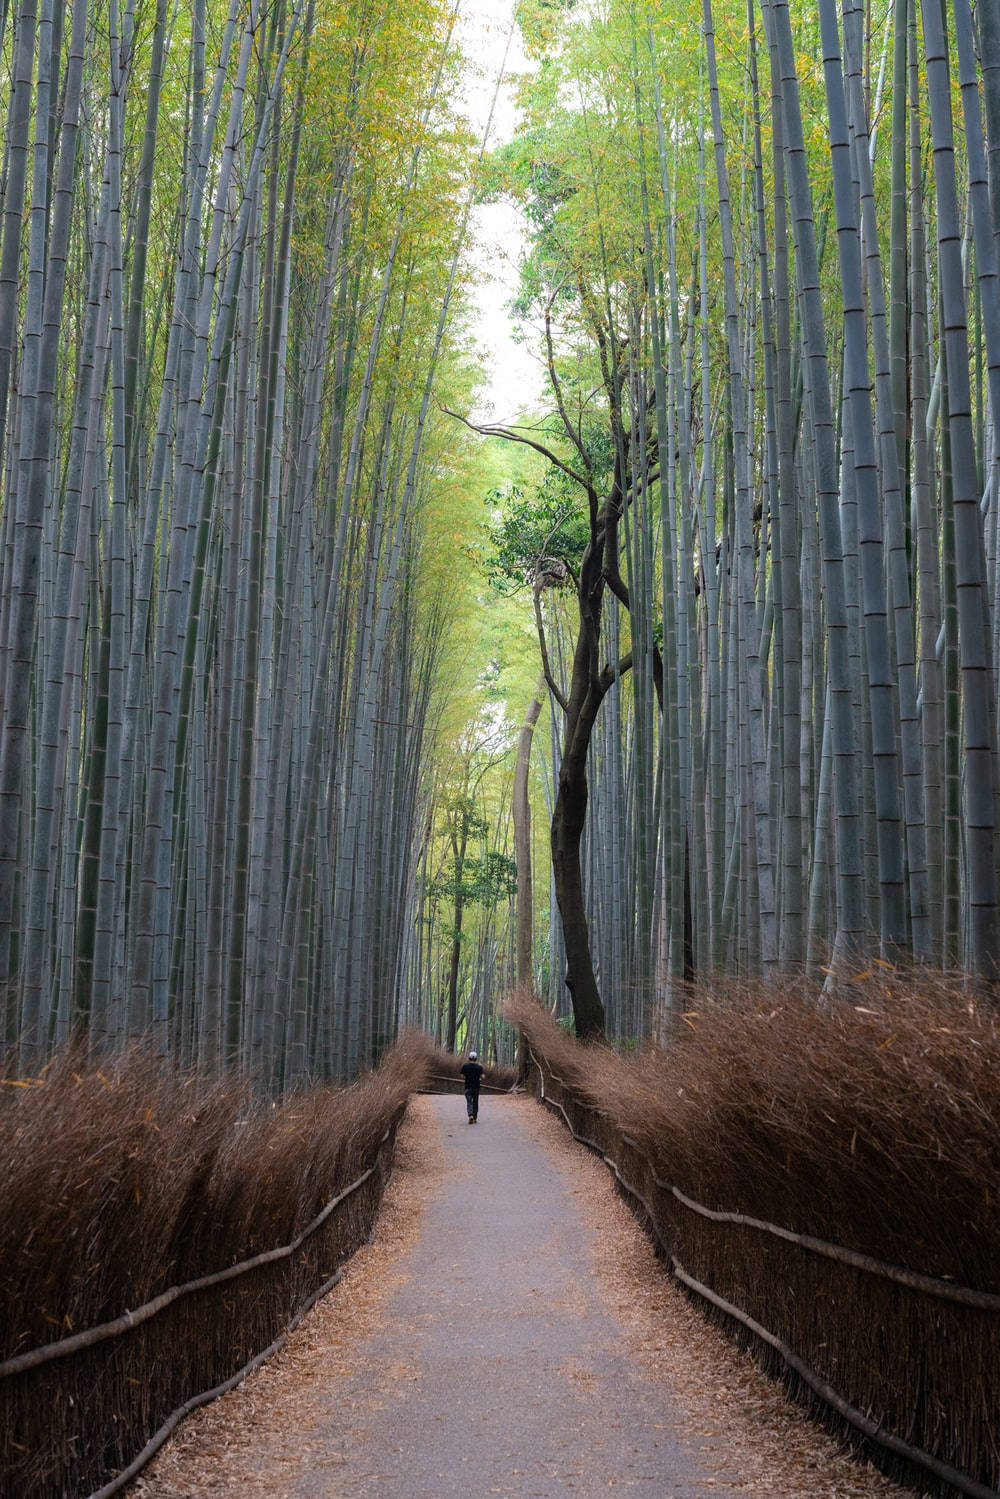 Japanese Bamboo Forest Iphone